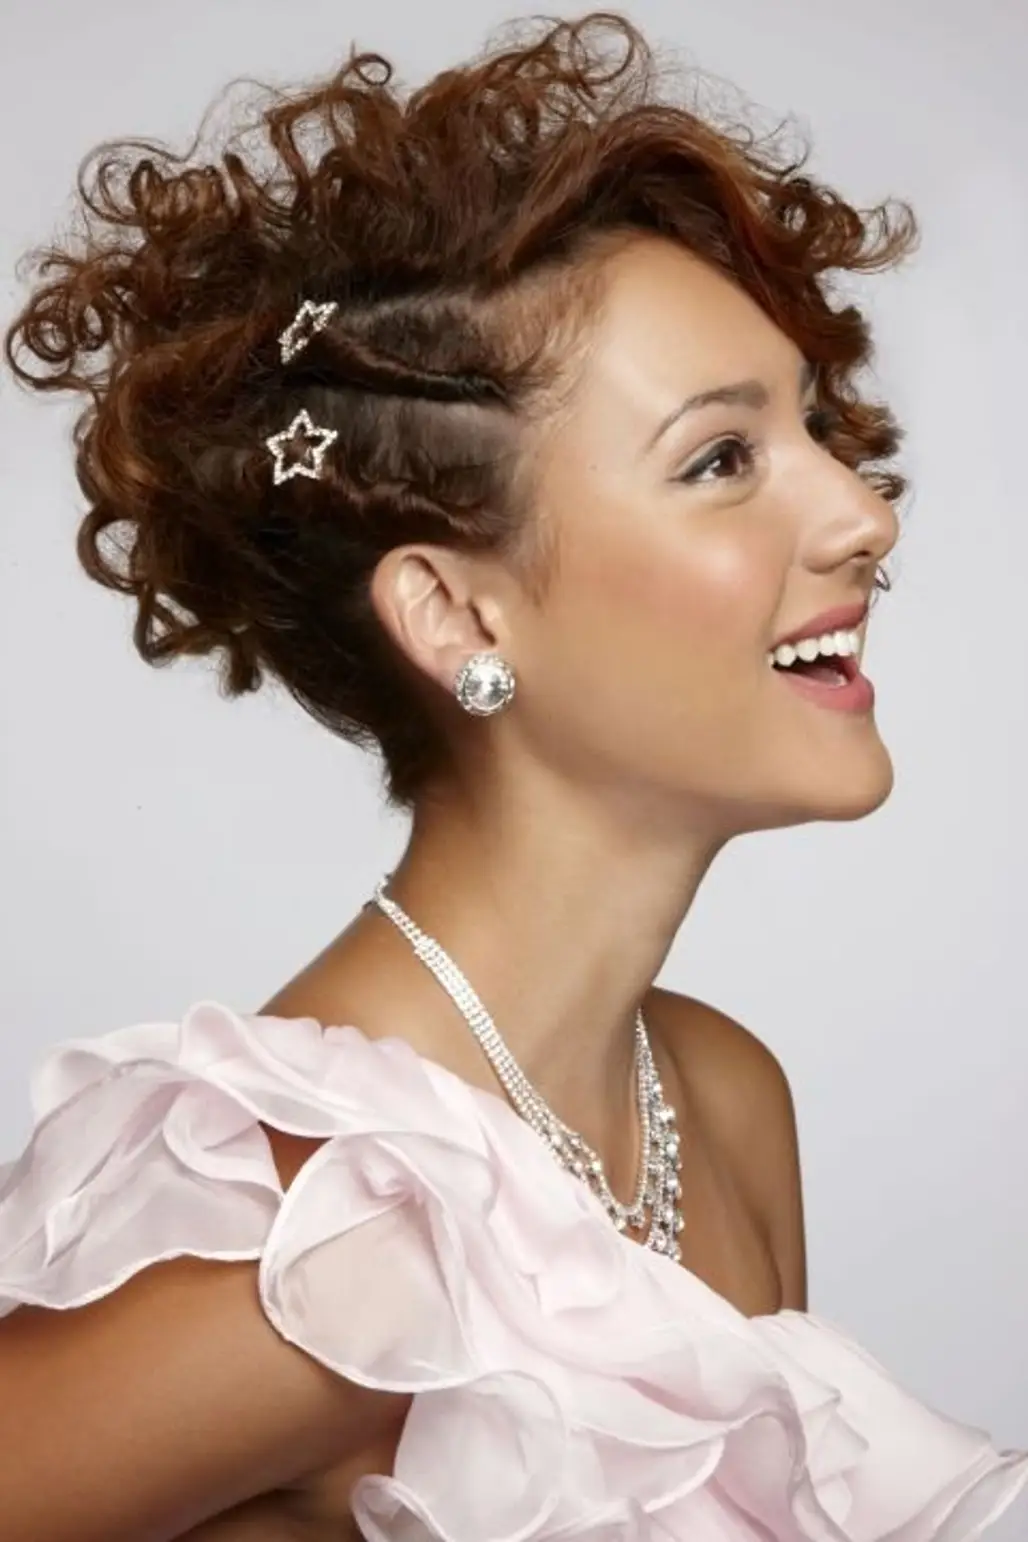 Best Prom Hairstyles 2020: Special Looks For Any Length